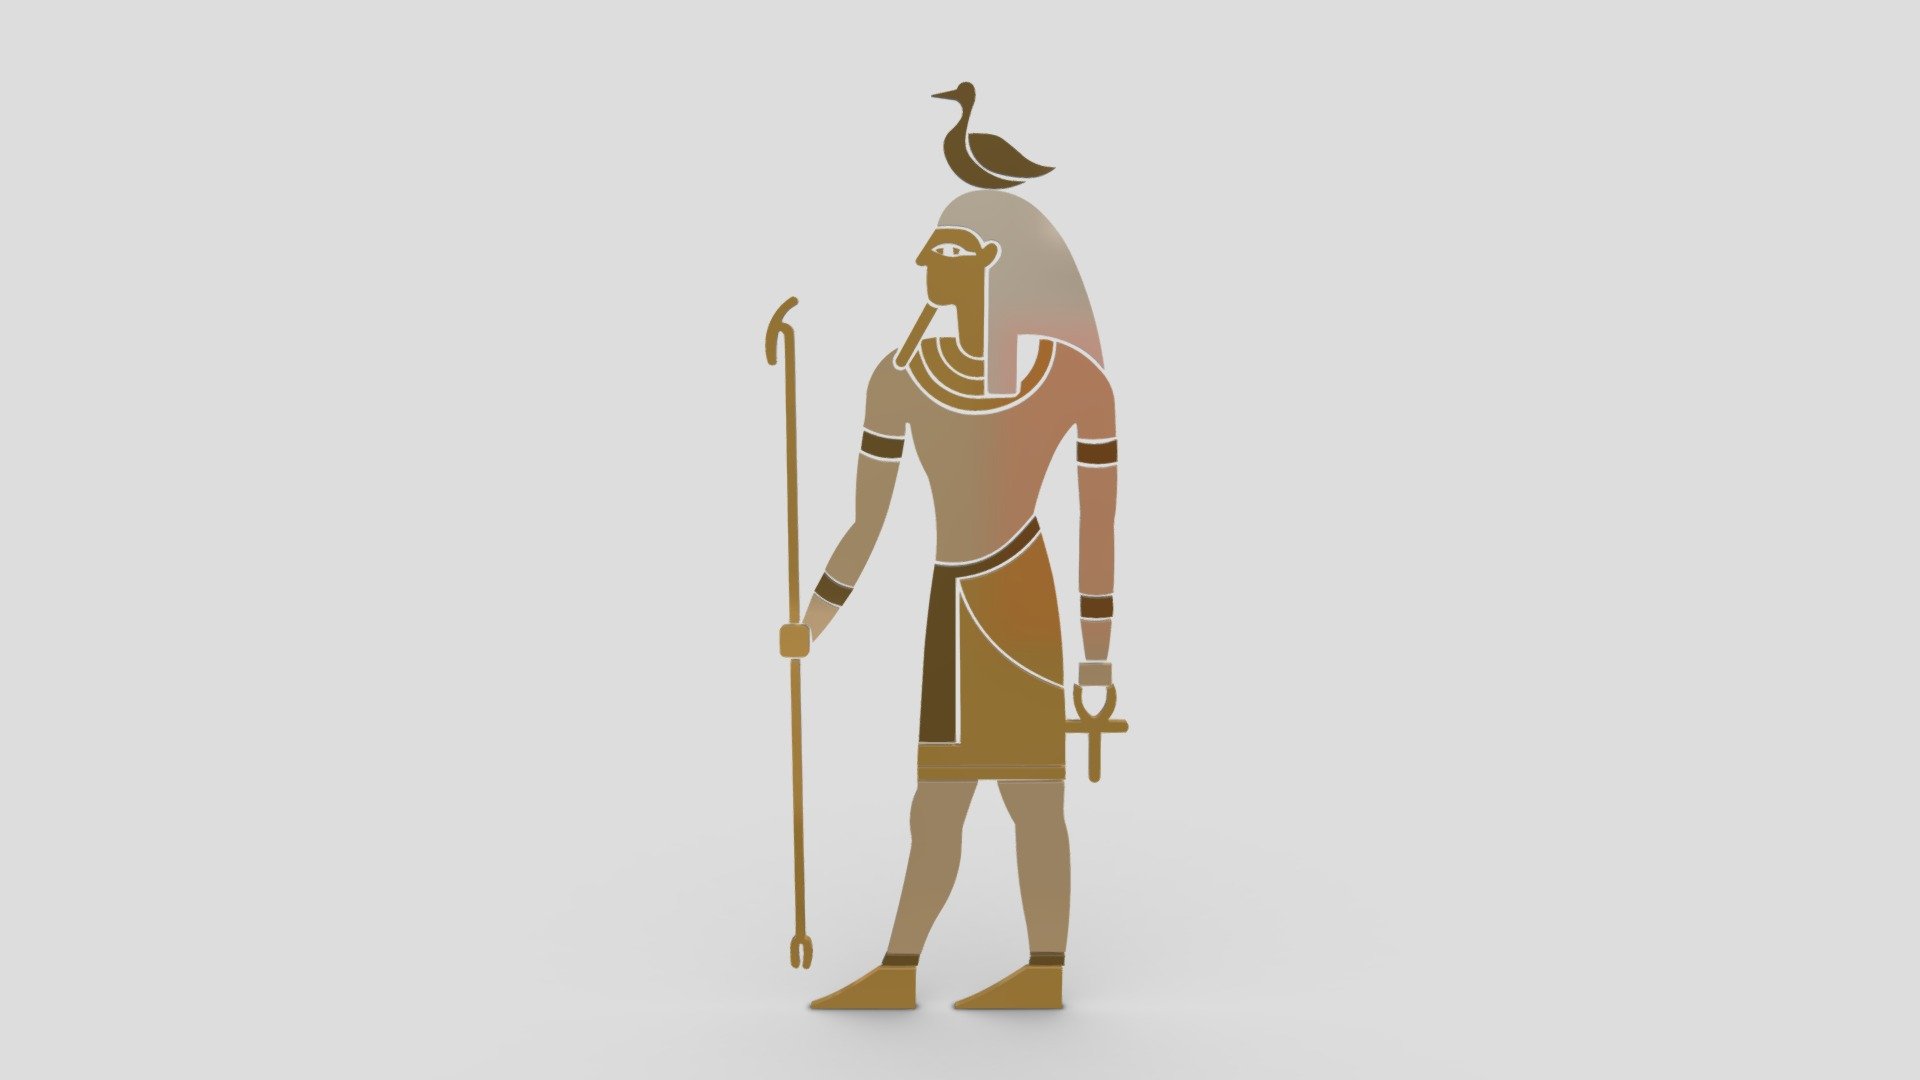 Egyptian Symbols - 024

Native Format File: 3Ds Max 2020 - Rendering by Vray Next.

3Ds Max Save as 3Ds Max 2017 with Converted all objects to Editable Poly.

3Ds Max Save as 3Ds Max 2020 ( Standard Materials ) with Converted all objects to Editable Poly.

Blender format file is available.

Exporting Formats: Autodesk FBX ( .fbx ), OBJ ( obj, mtl ), usdz, glb, gltf, 3DS, DAE.

All 2D Drawings are available as AutoCAD ( DWG ).

Support 24/7 3d model